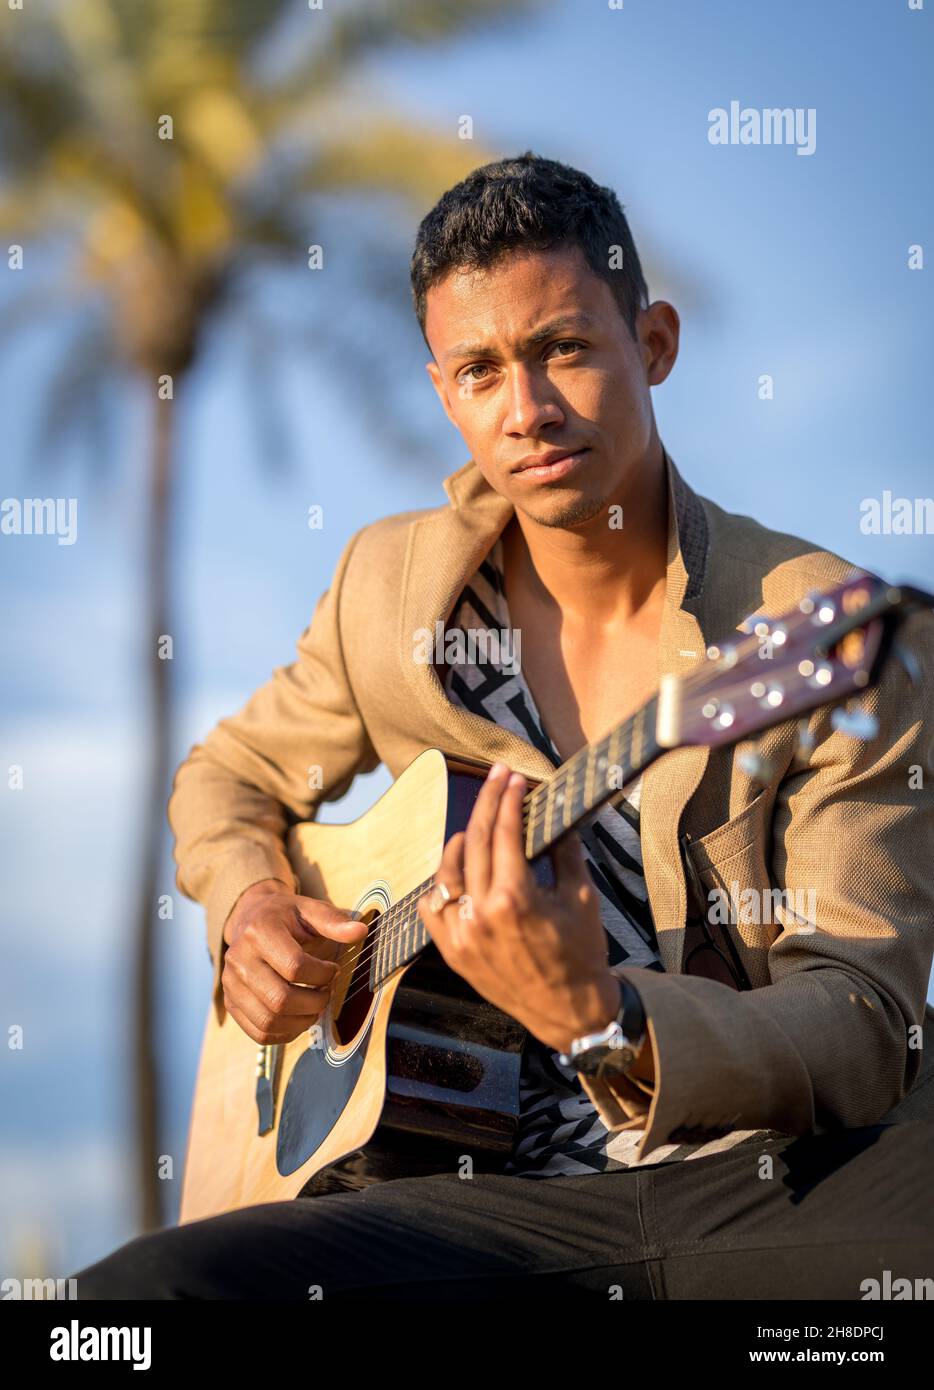 Portrait of Latin man looking at camera and playing guitar on the street with palm trees in the background at sunset Stock Photo